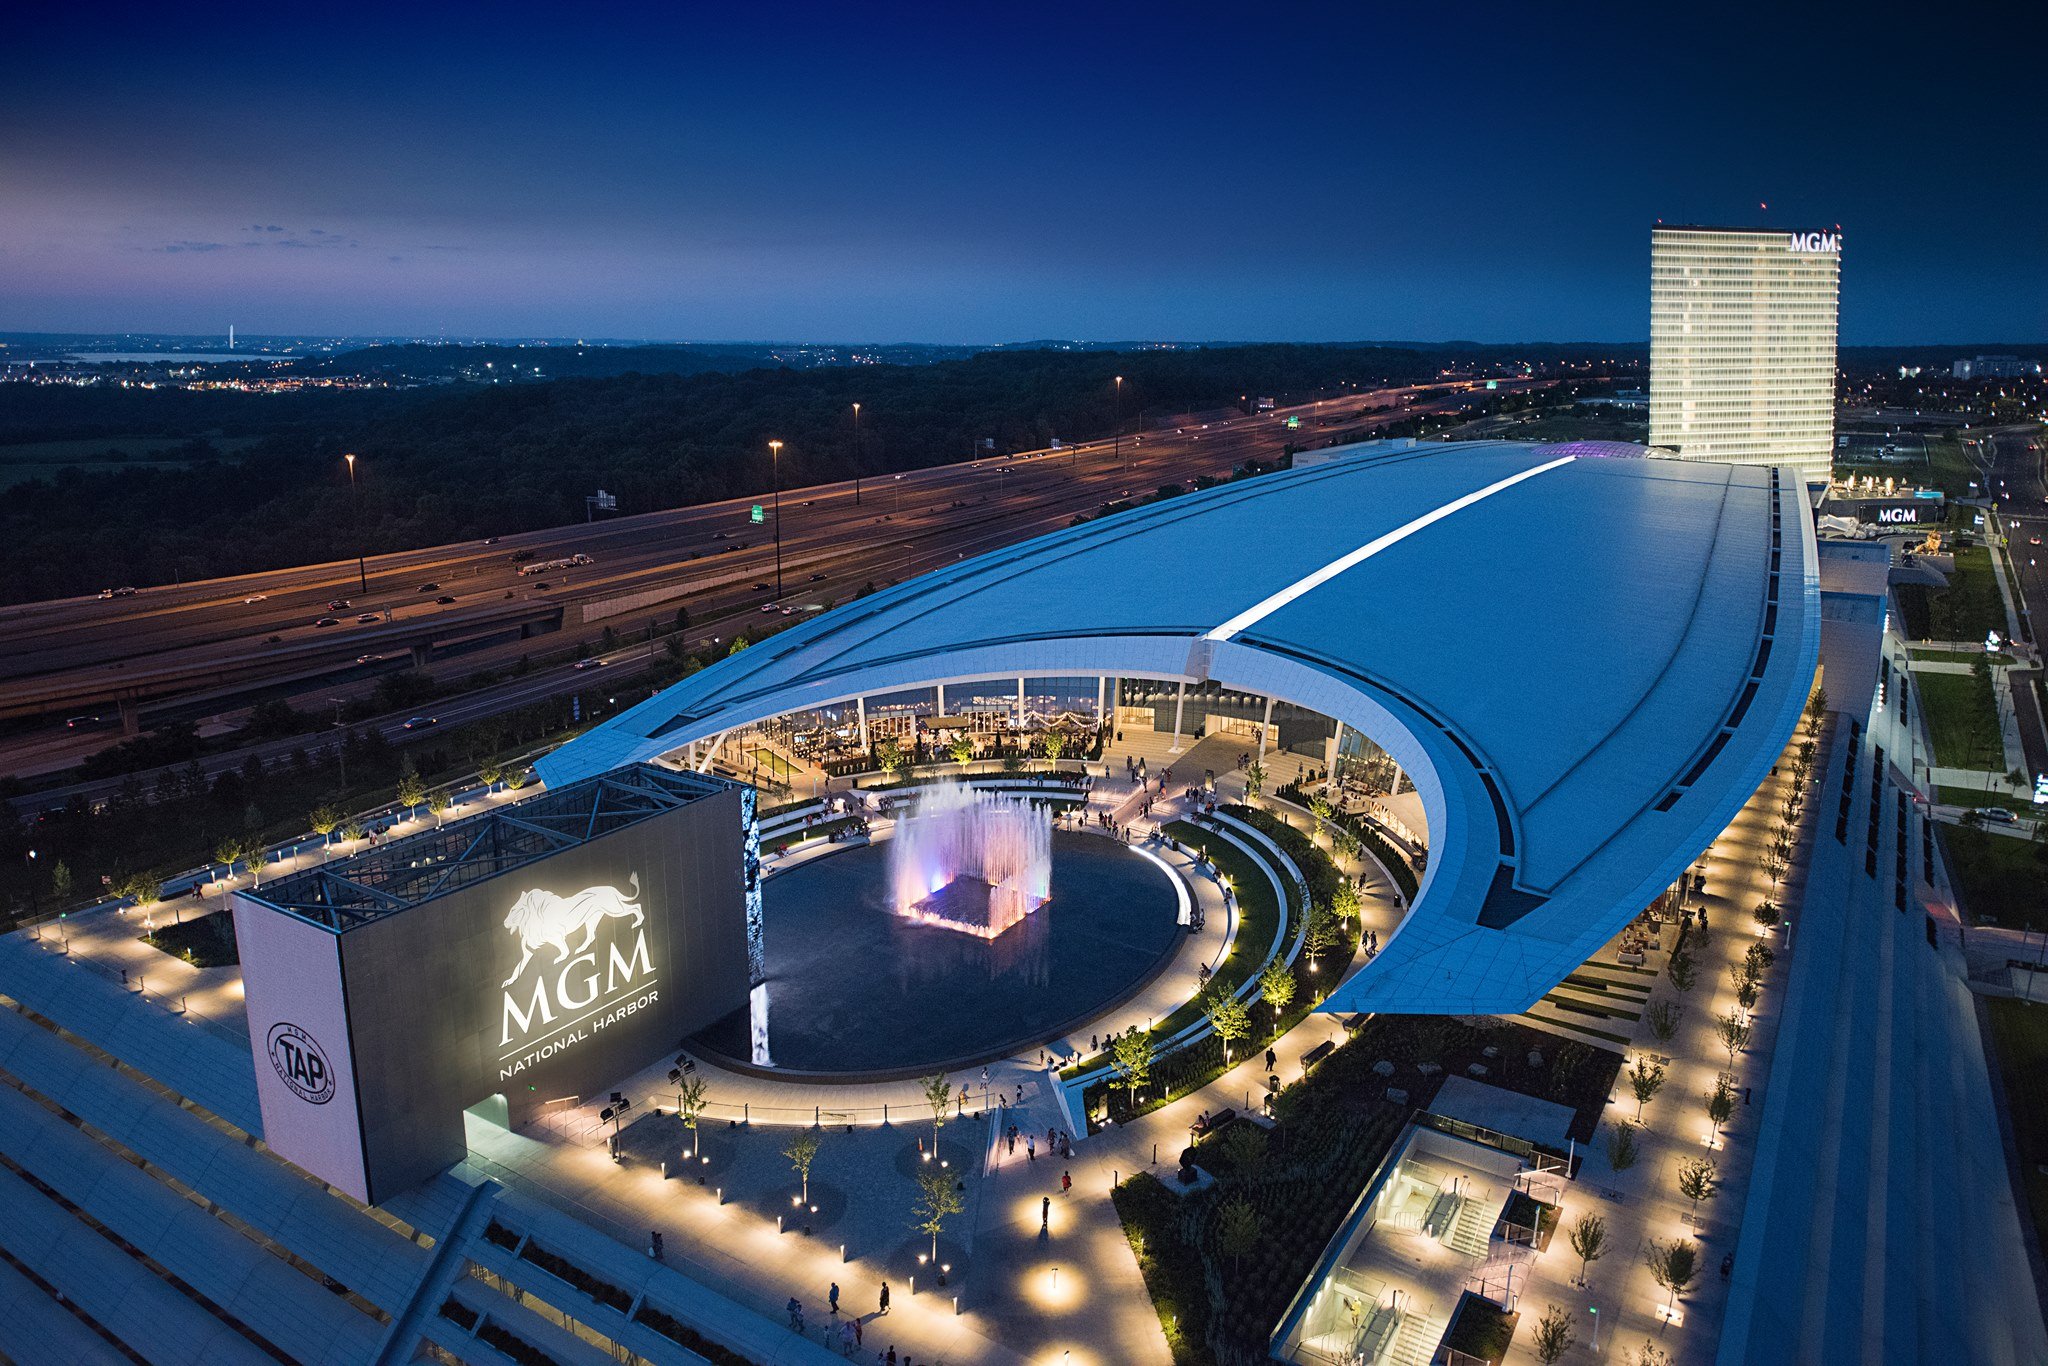 Jun 05, · The year-over-year decline was also present in two of the state's largest casinos, with MGM National Harbor and Horseshoe Casino Baltimore both posting revenue decreases in Author: Carley Milligan.